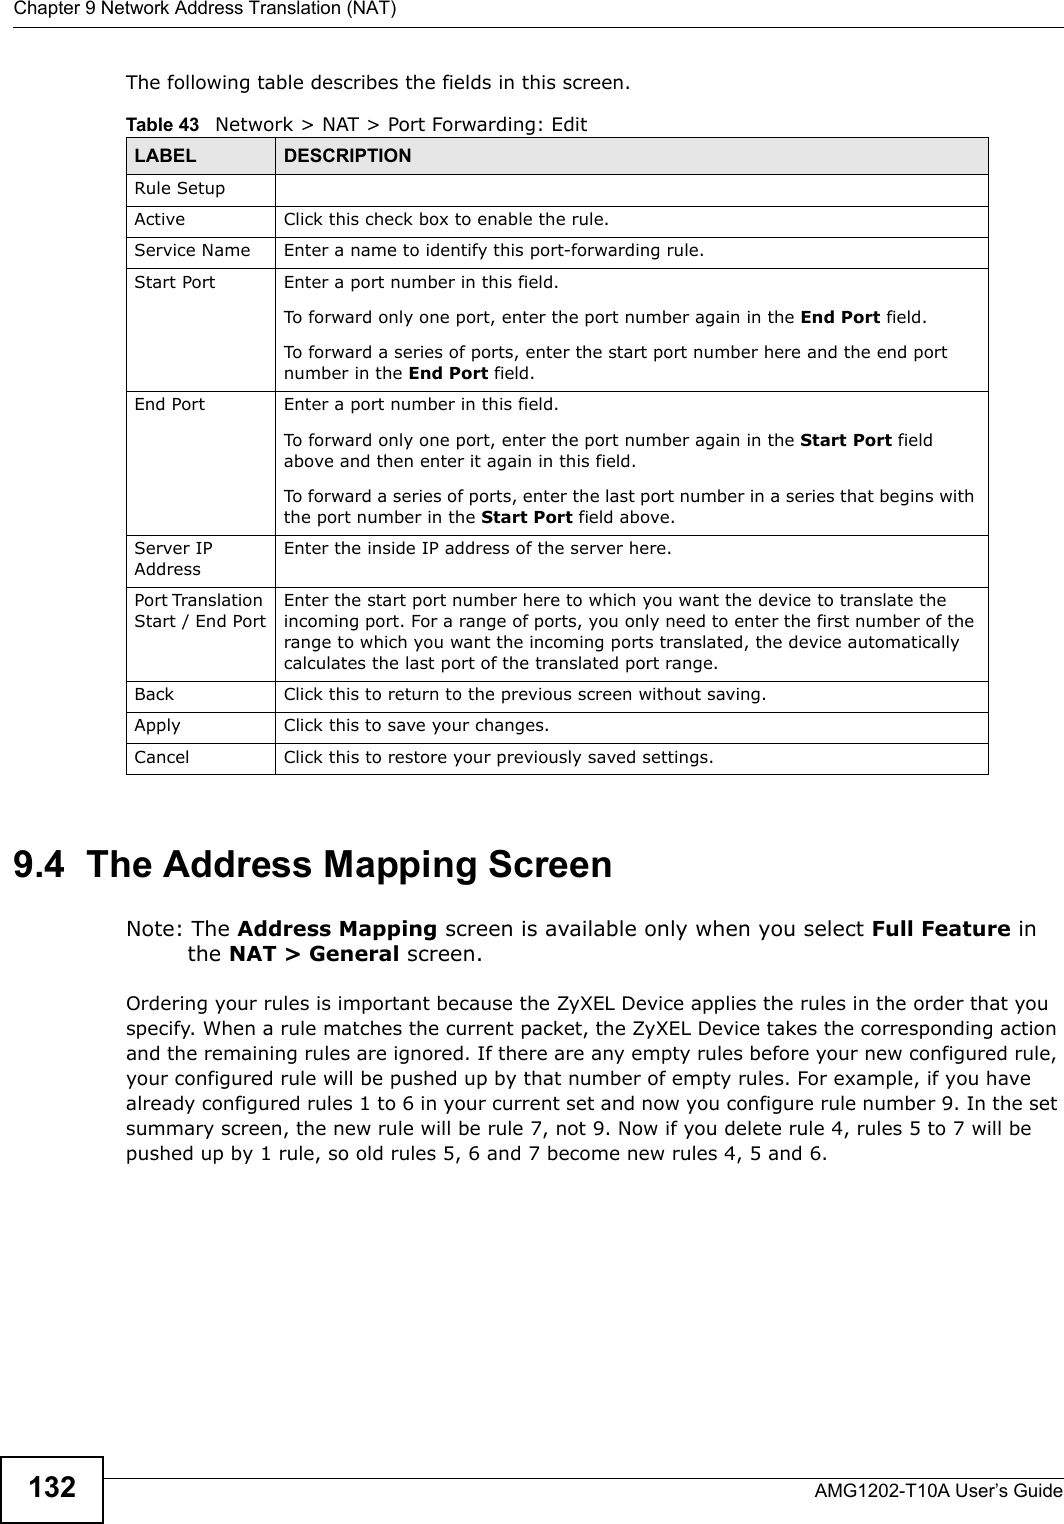 Chapter 9 Network Address Translation (NAT)AMG1202-T10A User’s Guide132The following table describes the fields in this screen.9.4  The Address Mapping ScreenNote: The Address Mapping screen is available only when you select Full Feature in the NAT &gt; General screen.Ordering your rules is important because the ZyXEL Device applies the rules in the order that you specify. When a rule matches the current packet, the ZyXEL Device takes the corresponding action and the remaining rules are ignored. If there are any empty rules before your new configured rule, your configured rule will be pushed up by that number of empty rules. For example, if you have already configured rules 1 to 6 in your current set and now you configure rule number 9. In the set summary screen, the new rule will be rule 7, not 9. Now if you delete rule 4, rules 5 to 7 will be pushed up by 1 rule, so old rules 5, 6 and 7 become new rules 4, 5 and 6. Table 43   Network &gt; NAT &gt; Port Forwarding: Edit LABEL DESCRIPTIONRule SetupActive Click this check box to enable the rule.Service Name Enter a name to identify this port-forwarding rule.Start Port  Enter a port number in this field. To forward only one port, enter the port number again in the End Port field. To forward a series of ports, enter the start port number here and the end port number in the End Port field.End Port  Enter a port number in this field. To forward only one port, enter the port number again in the Start Port field above and then enter it again in this field. To forward a series of ports, enter the last port number in a series that begins with the port number in the Start Port field above.Server IP AddressEnter the inside IP address of the server here.Port Translation Start / End PortEnter the start port number here to which you want the device to translate the incoming port. For a range of ports, you only need to enter the first number of the range to which you want the incoming ports translated, the device automatically calculates the last port of the translated port range.Back Click this to return to the previous screen without saving.Apply Click this to save your changes.Cancel Click this to restore your previously saved settings.